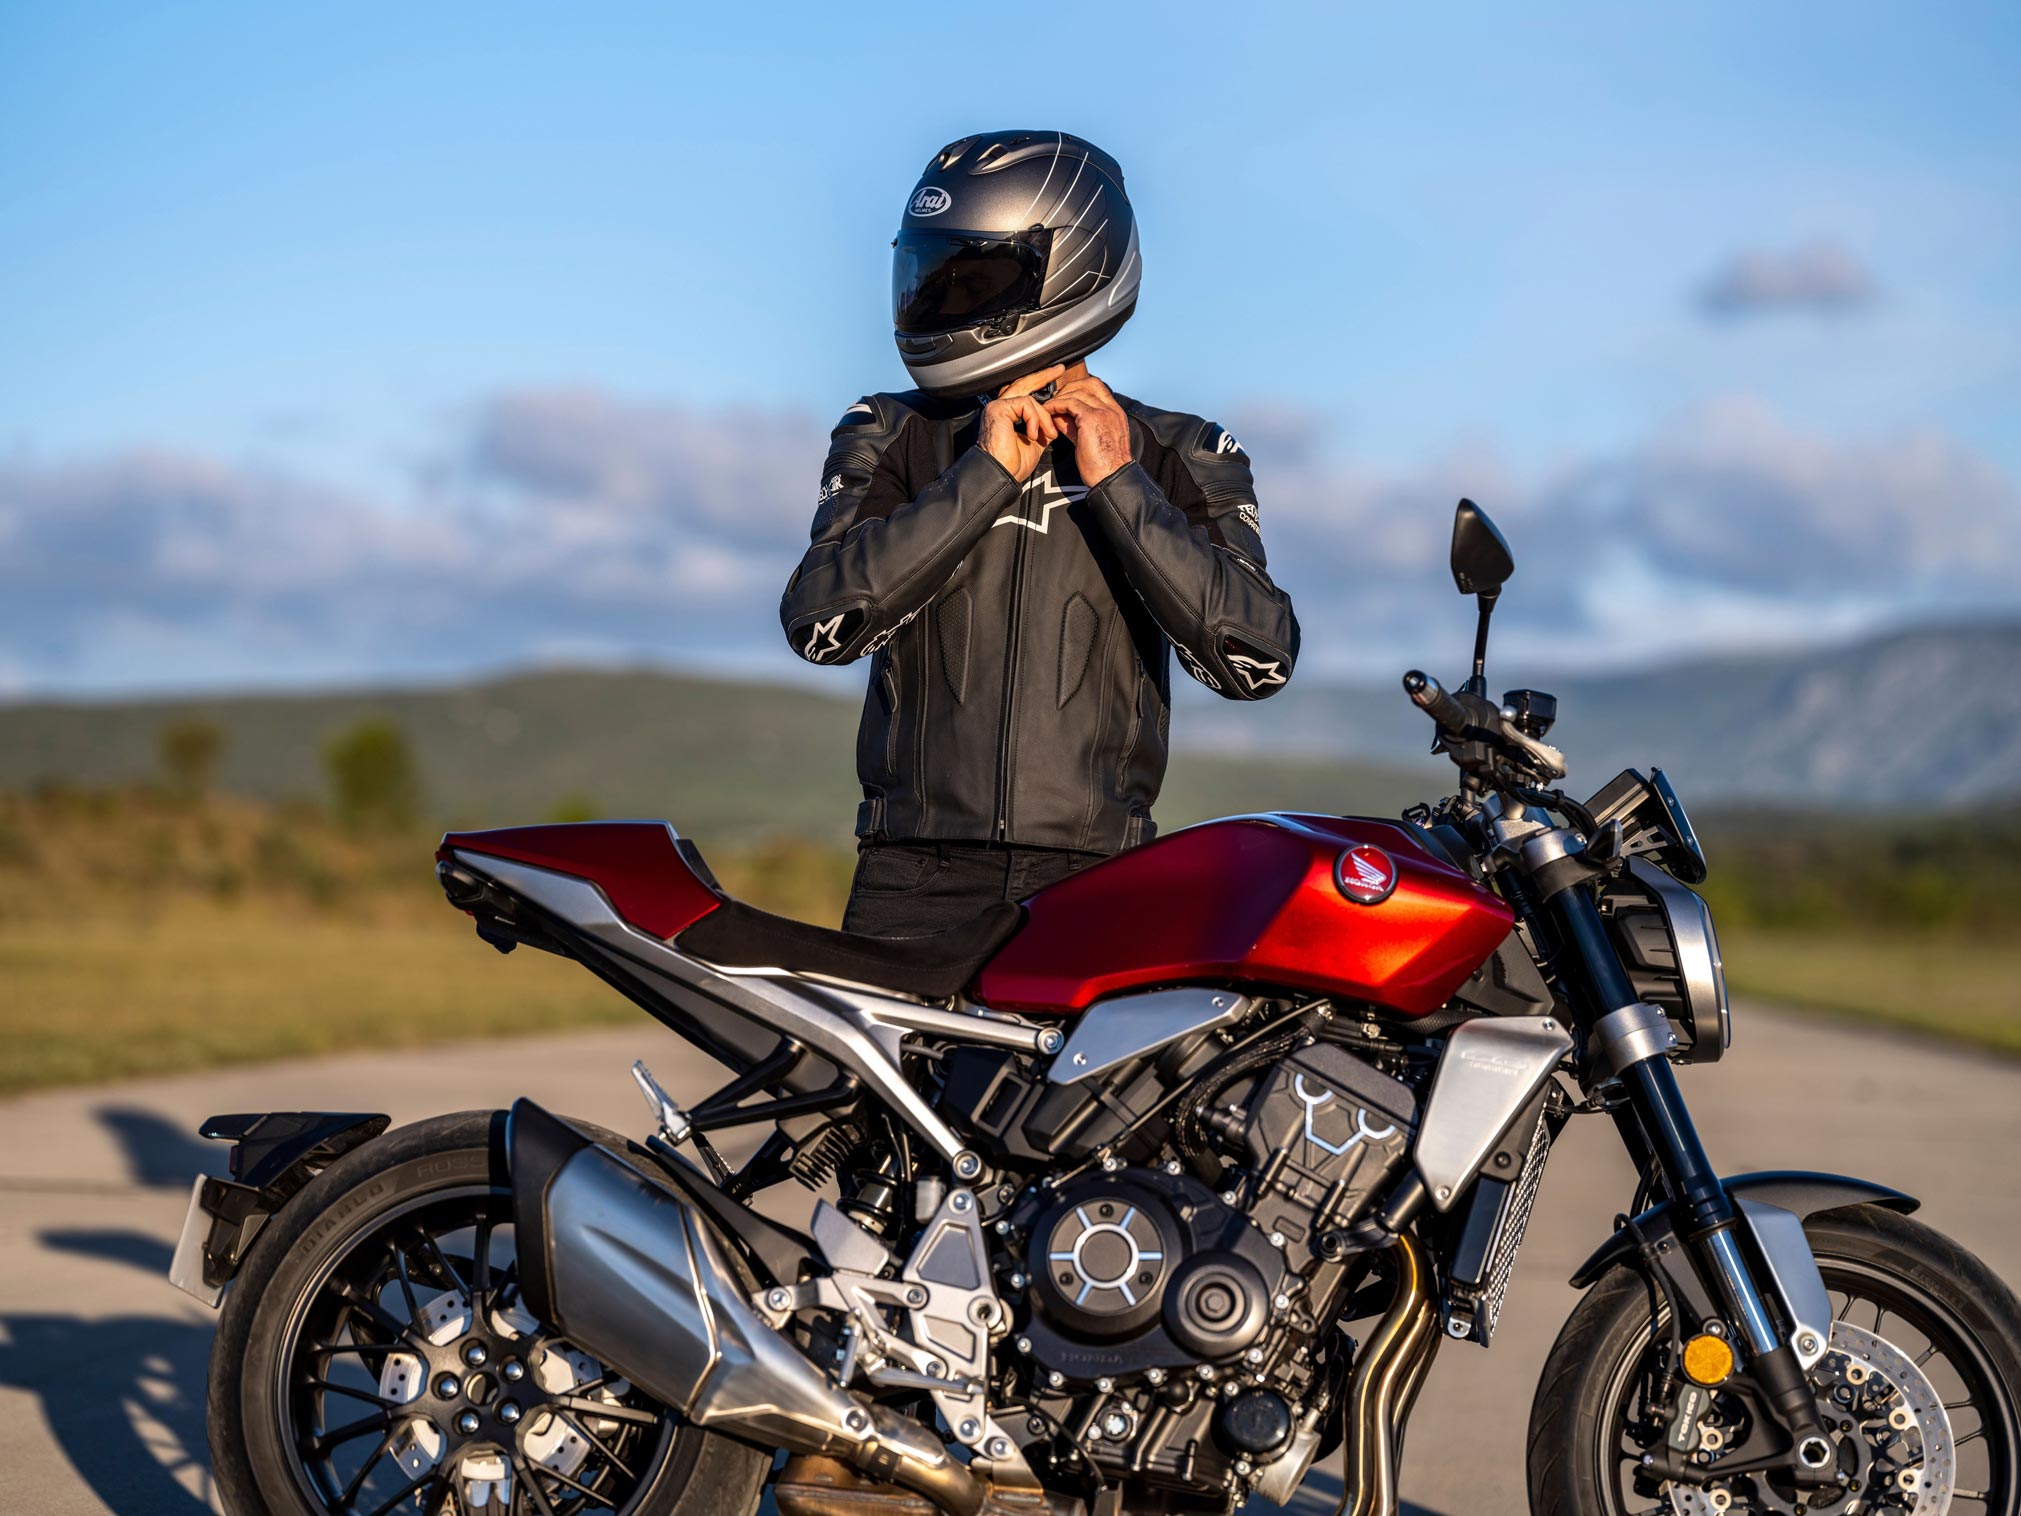 A side view of a rider with the new 2021 Honda CB1000R6